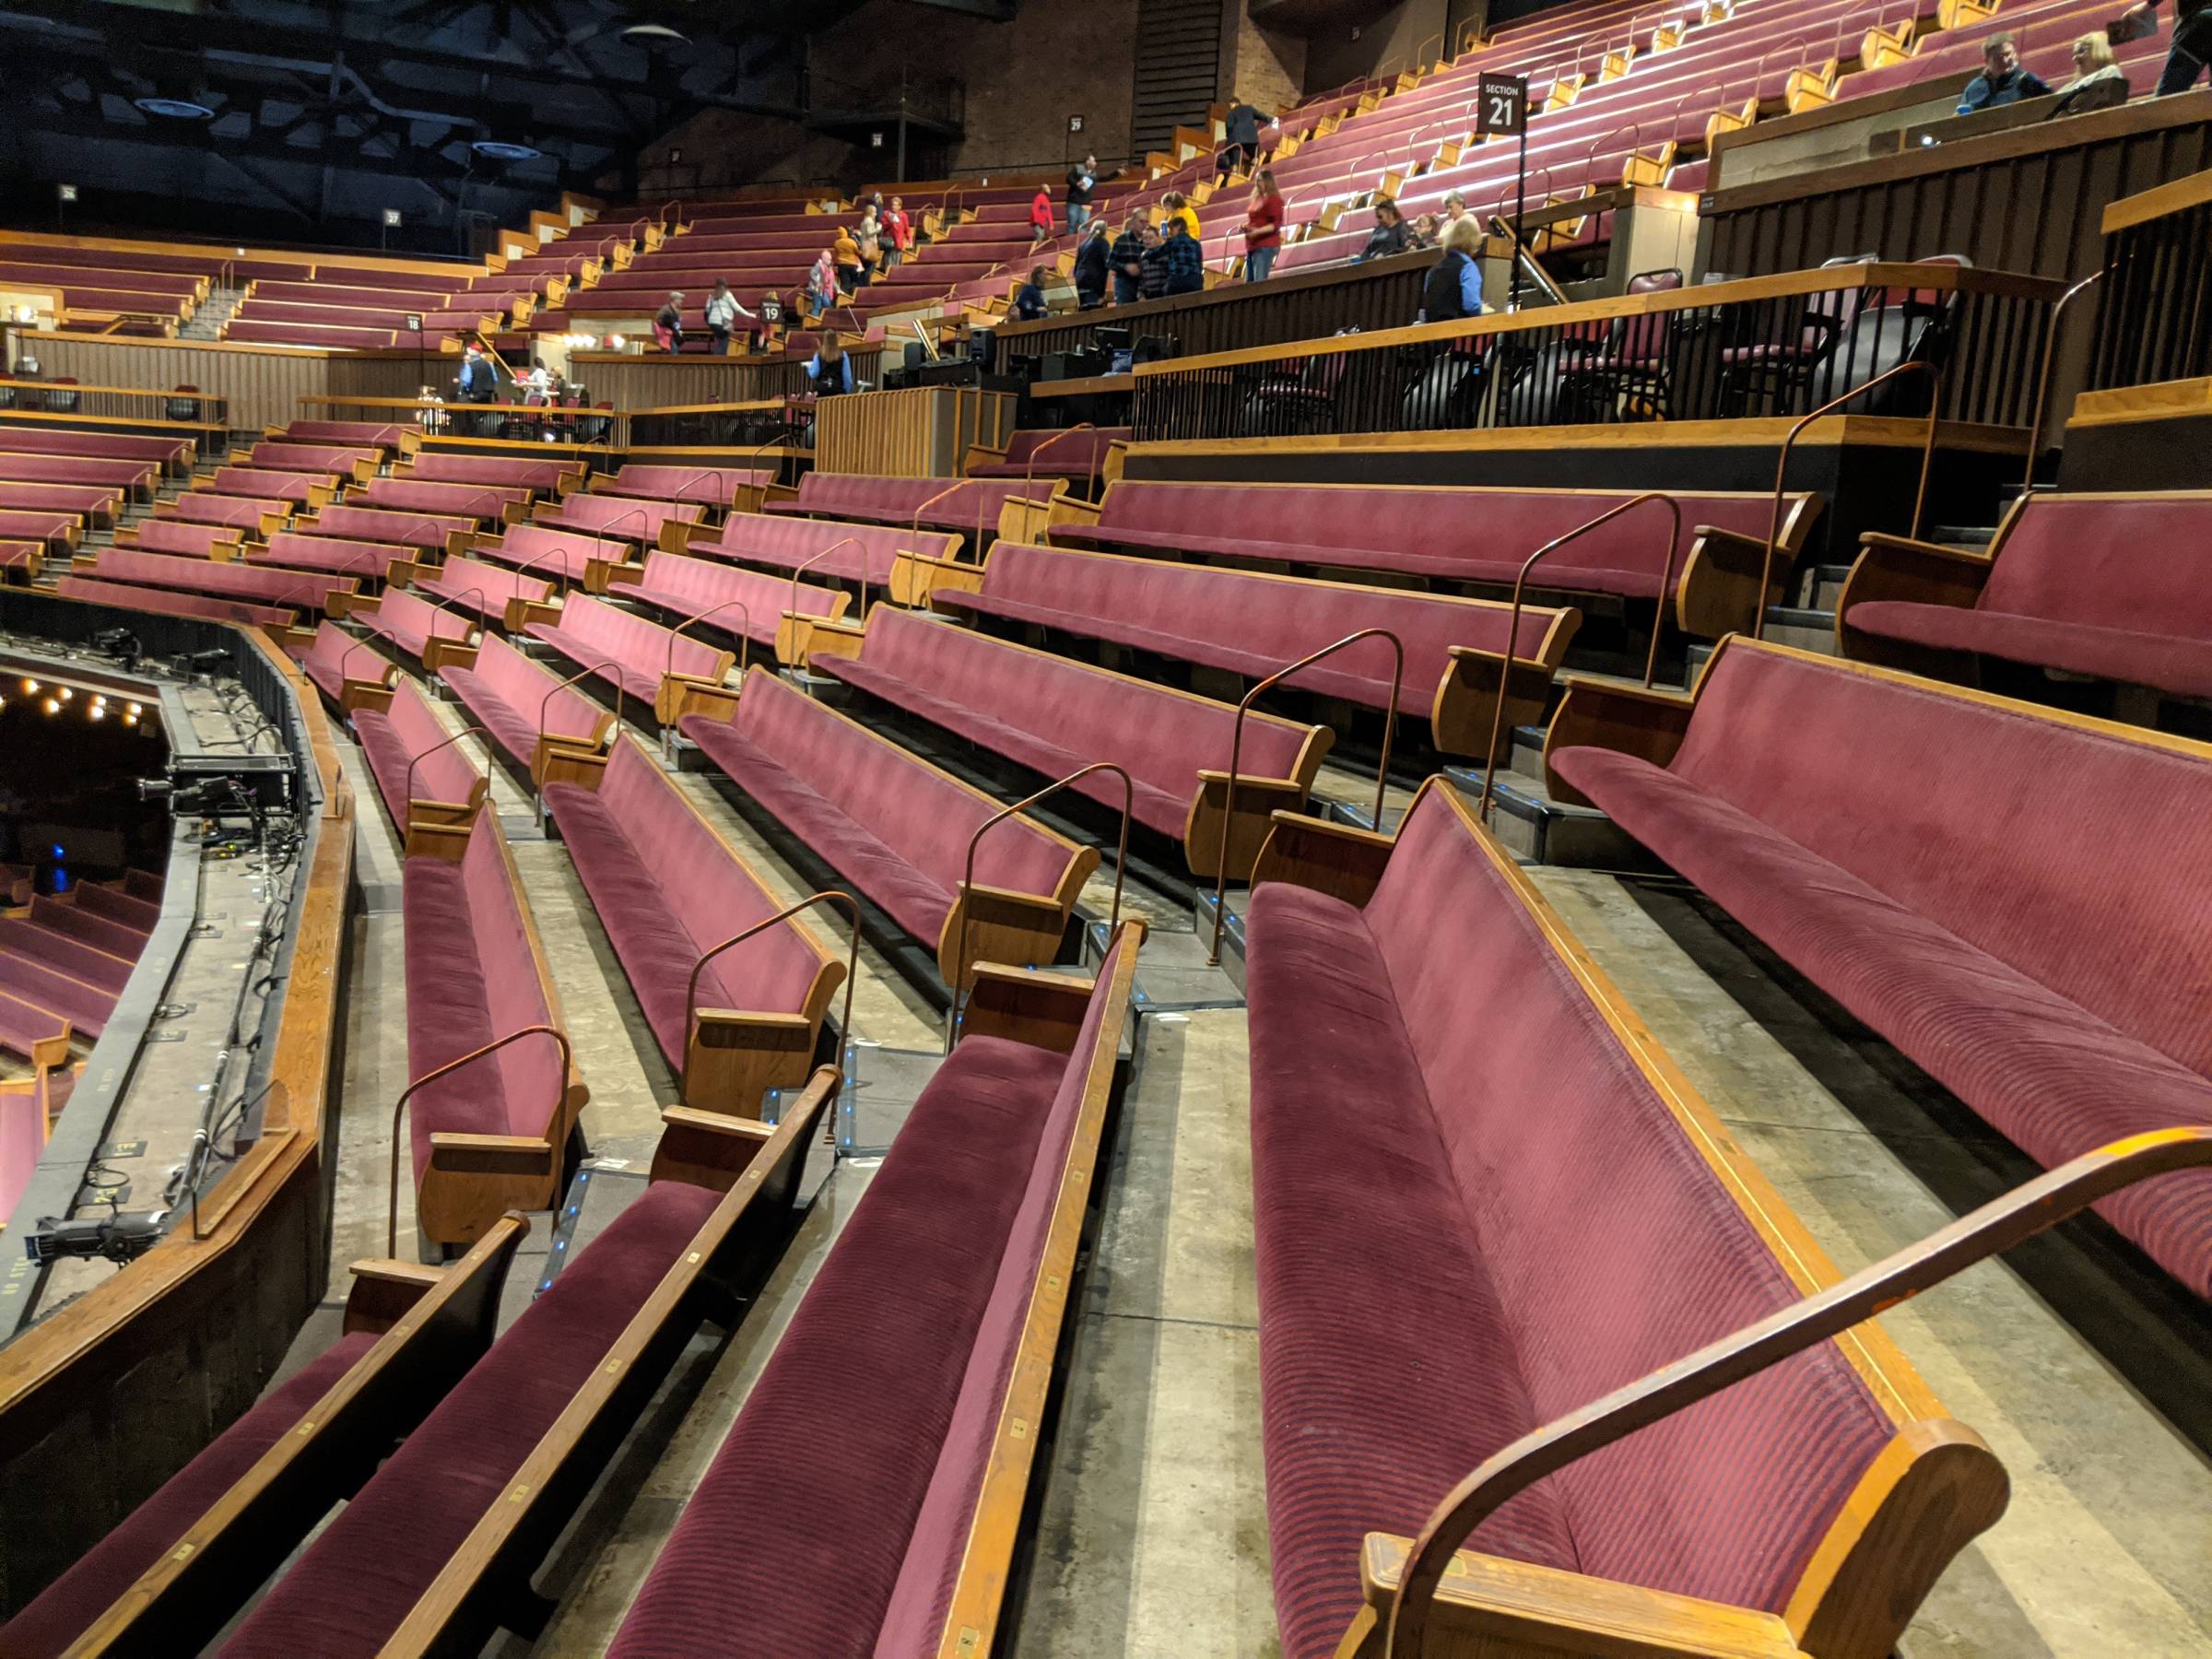 mezzanine seating at Grand Ole Opry House